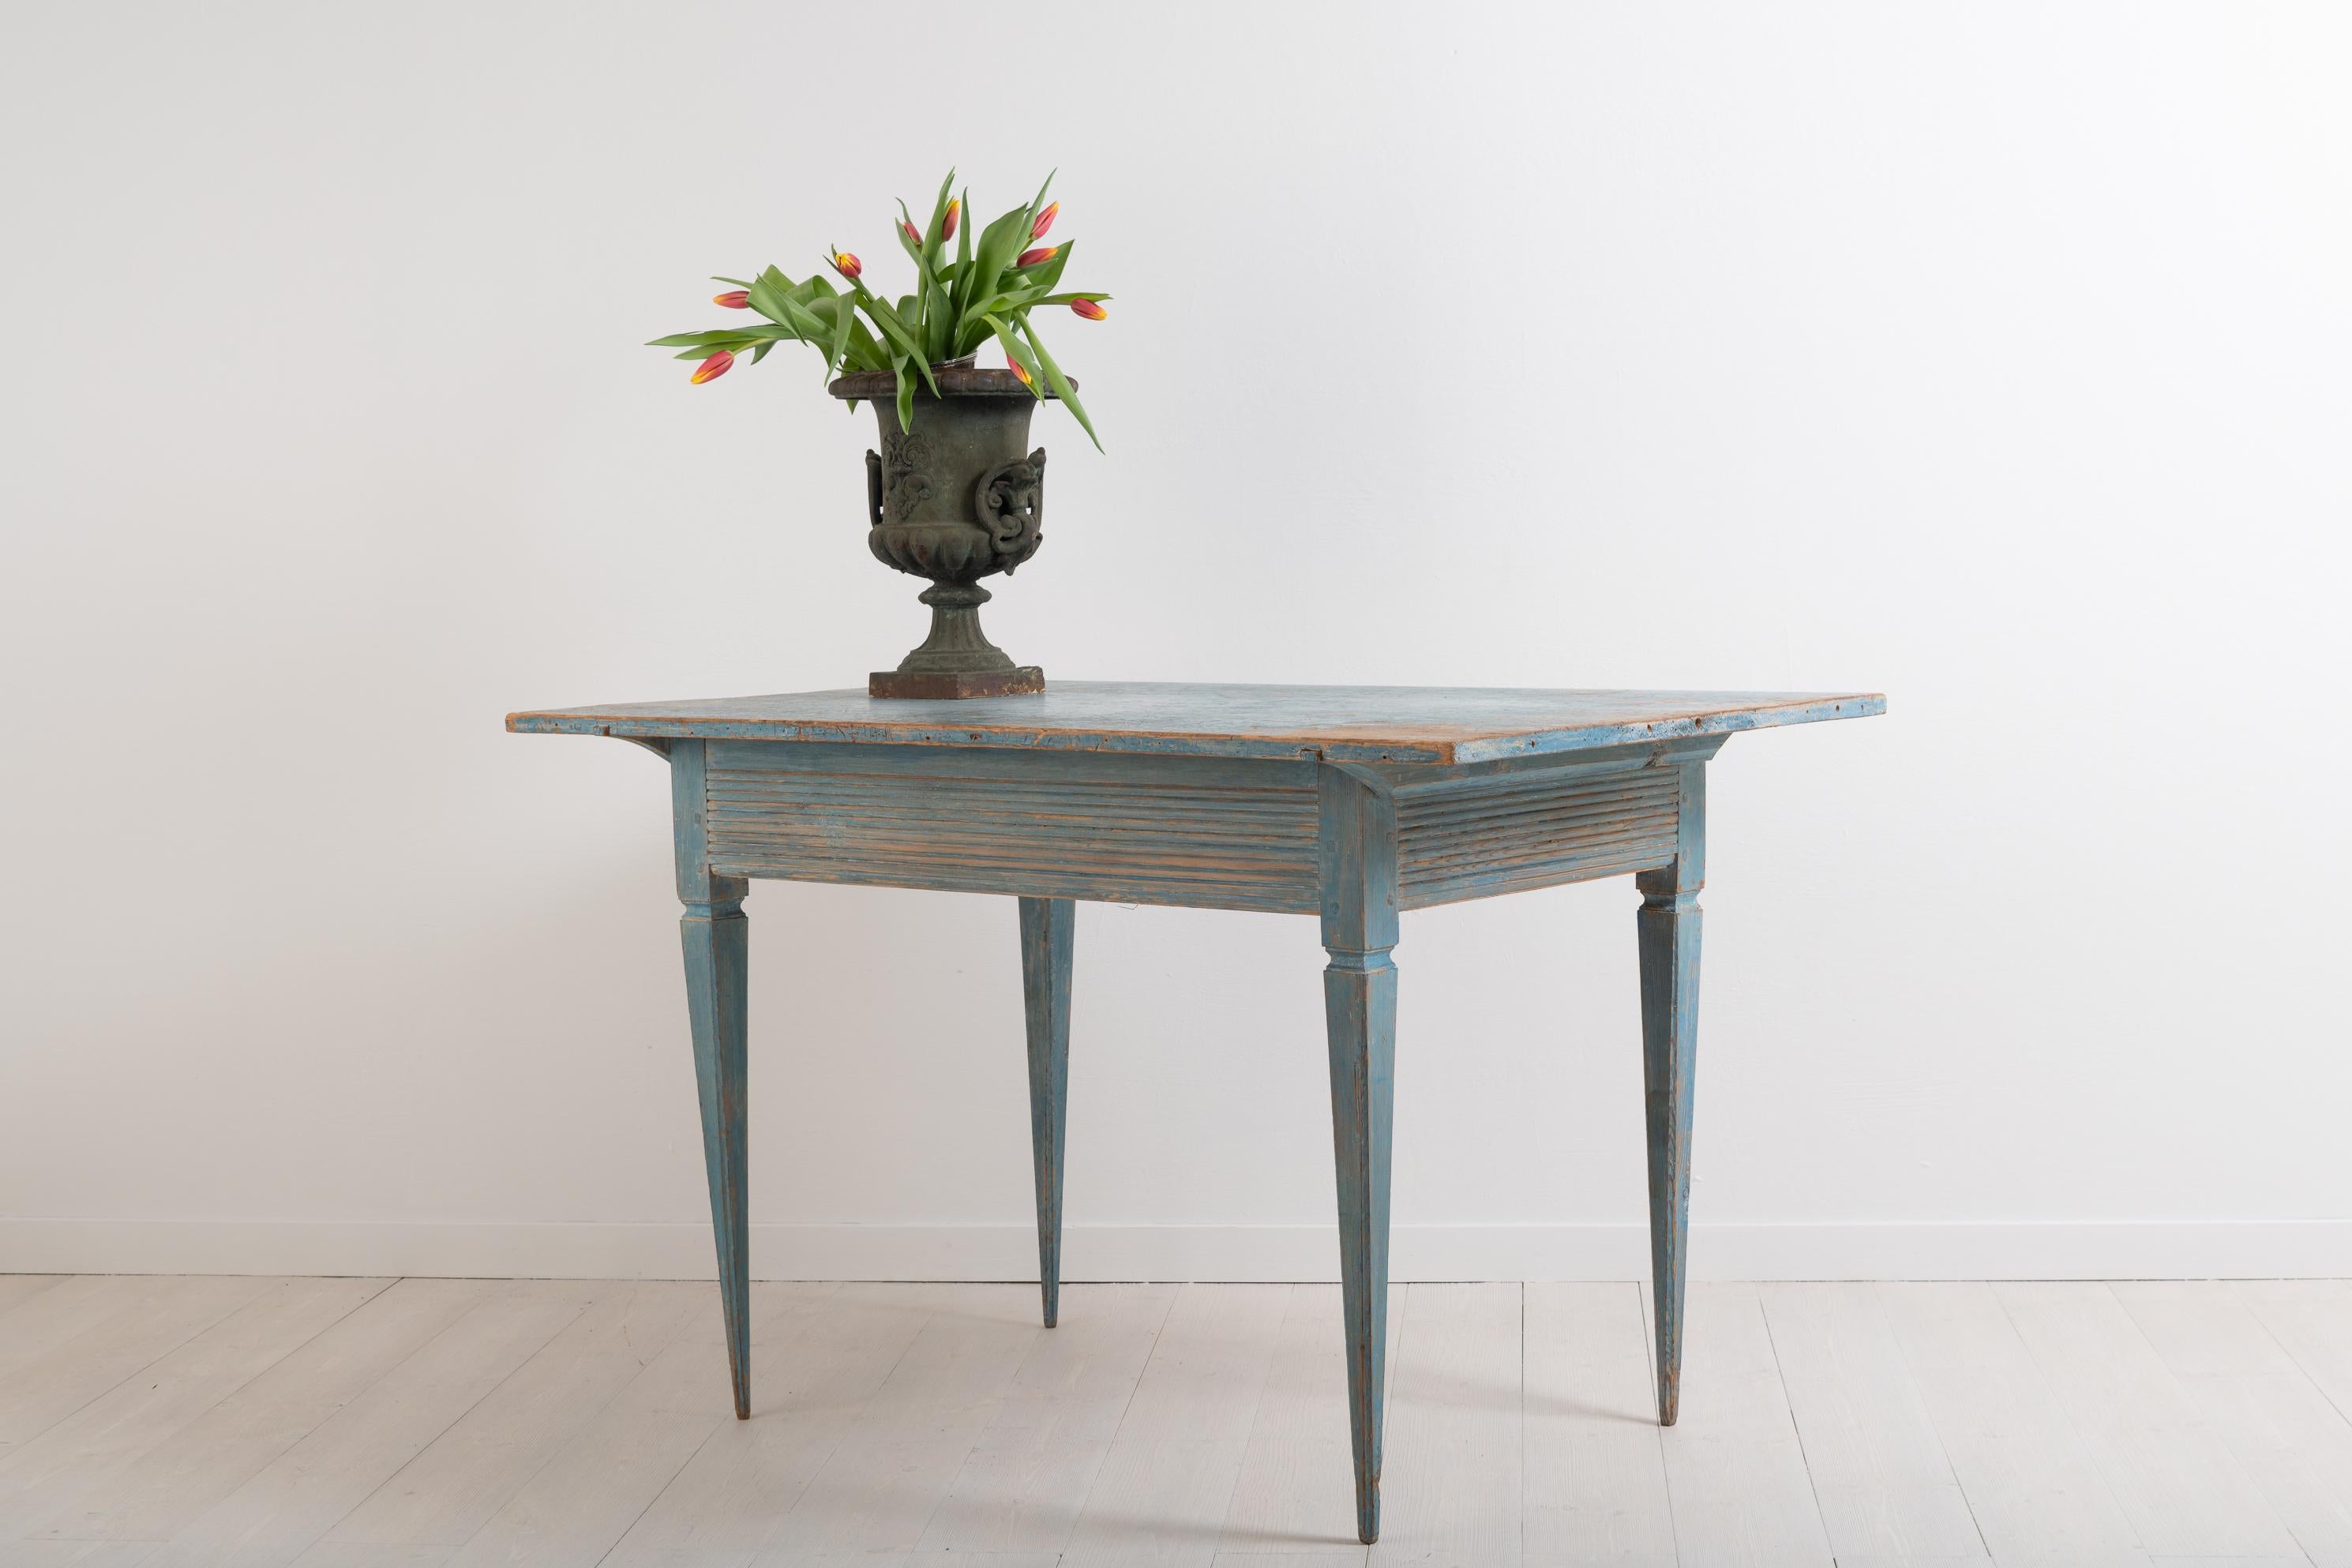 Gustavian side table from northern Sweden. The table has a ribbed rim and straight tapered legs. Original blue paint with natural patina and distress. The side table is equilateral, all sides are of equal length. Made circa 1790 in healthy and solid